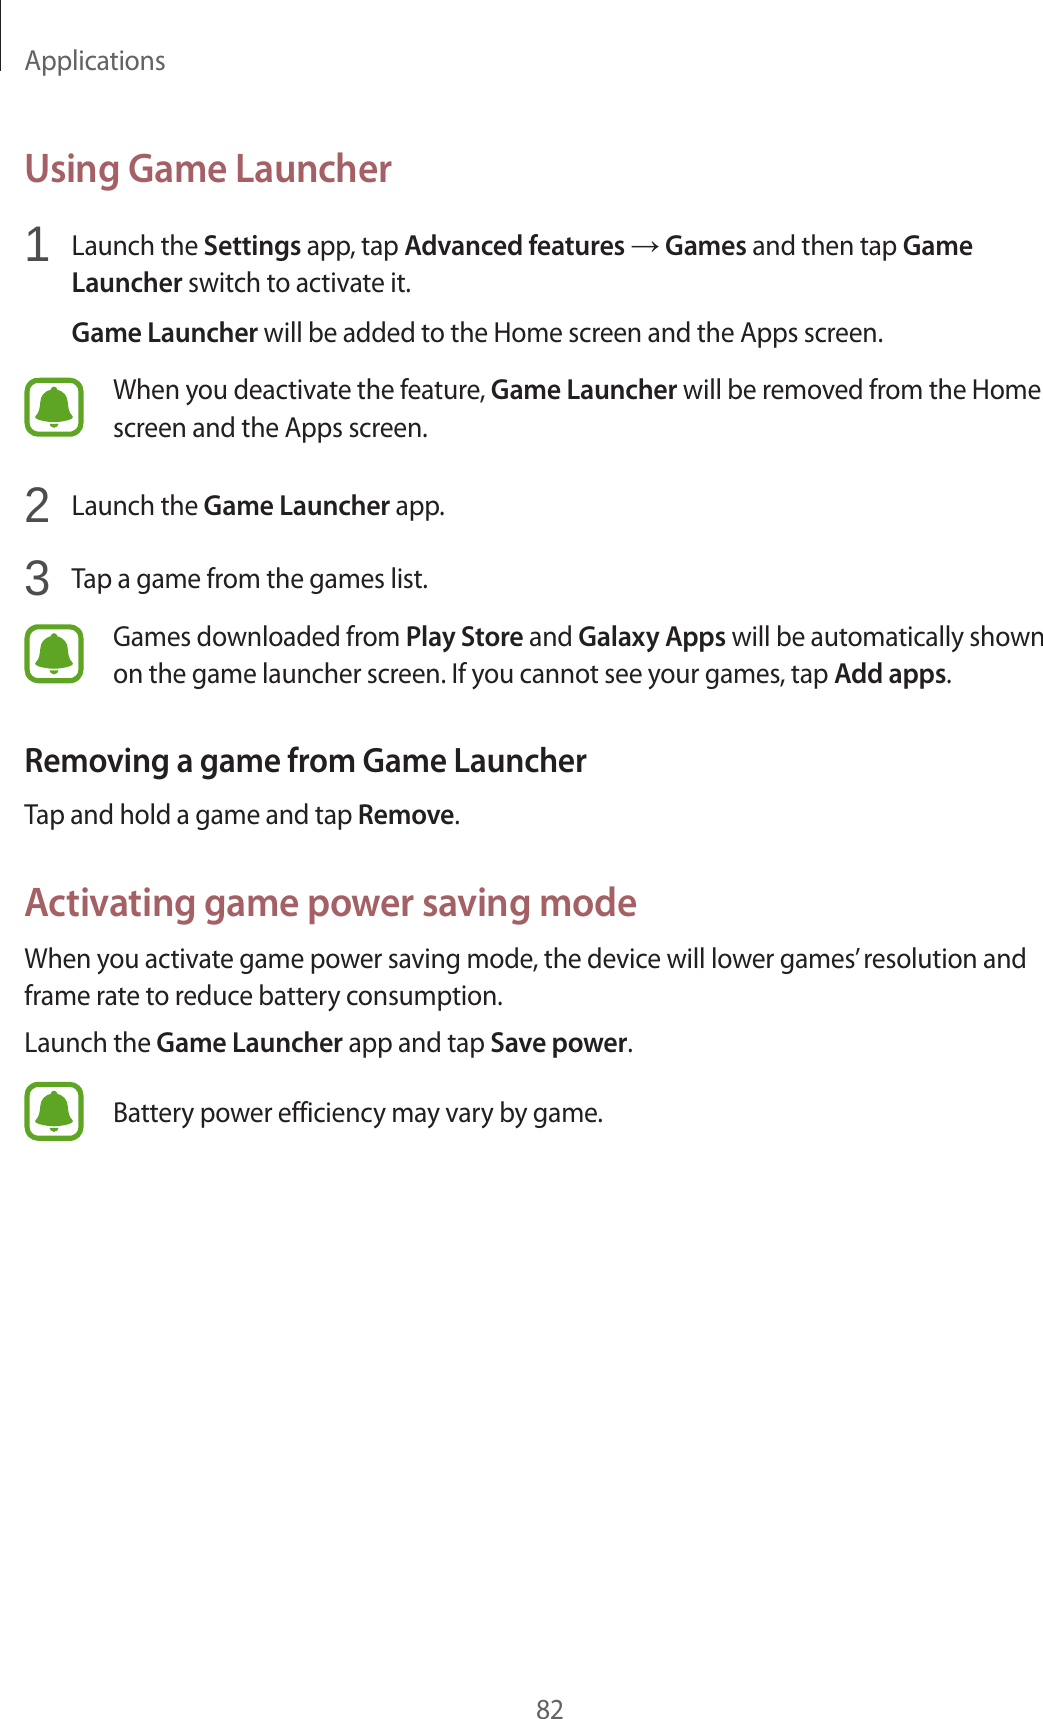 Applications82Using Game Launcher1  Launch the Settings app, tap Advanced features → Games and then tap Game Launcher switch to activate it.Game Launcher will be added to the Home screen and the Apps screen.When you deactivate the feature, Game Launcher will be removed from the Home screen and the Apps screen.2  Launch the Game Launcher app.3  Tap a game from the games list.Games downloaded from Play Store and Galaxy Apps will be automatically shown on the game launcher screen. If you cannot see your games, tap Add apps.Removing a game from Game LauncherTap and hold a game and tap Remove.Activating game power saving modeWhen you activate game power saving mode, the device will lower games’ resolution and frame rate to reduce battery consumption.Launch the Game Launcher app and tap Save power.Battery power efficiency may vary by game.